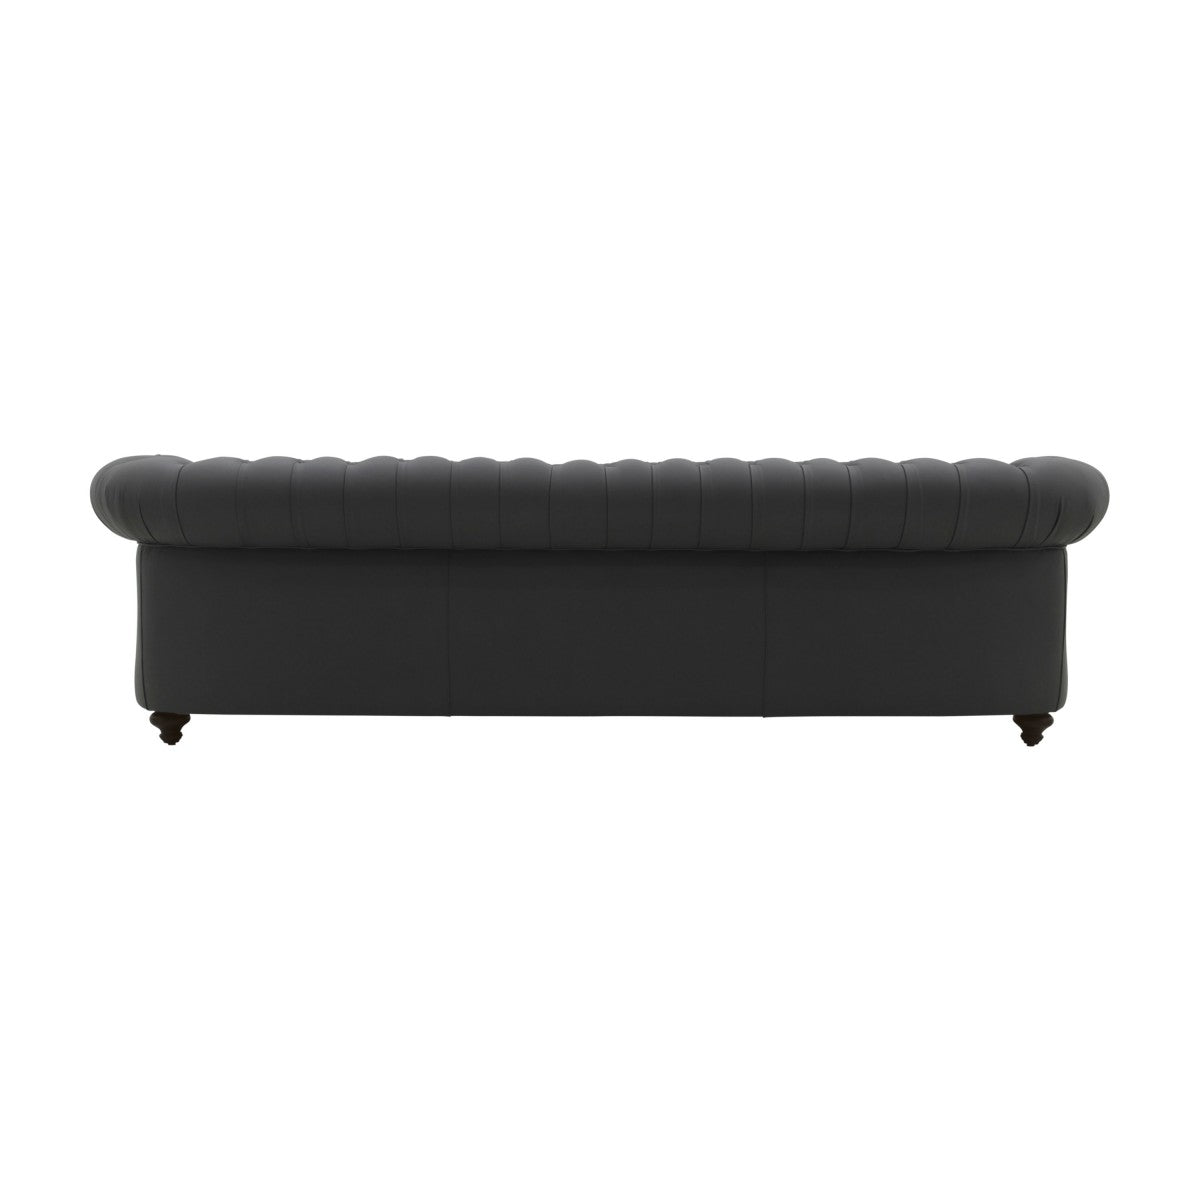 Tervere Bespoke Upholstered Chesterfield Style Five Seater Sofa MS9503G Custom Made To Order